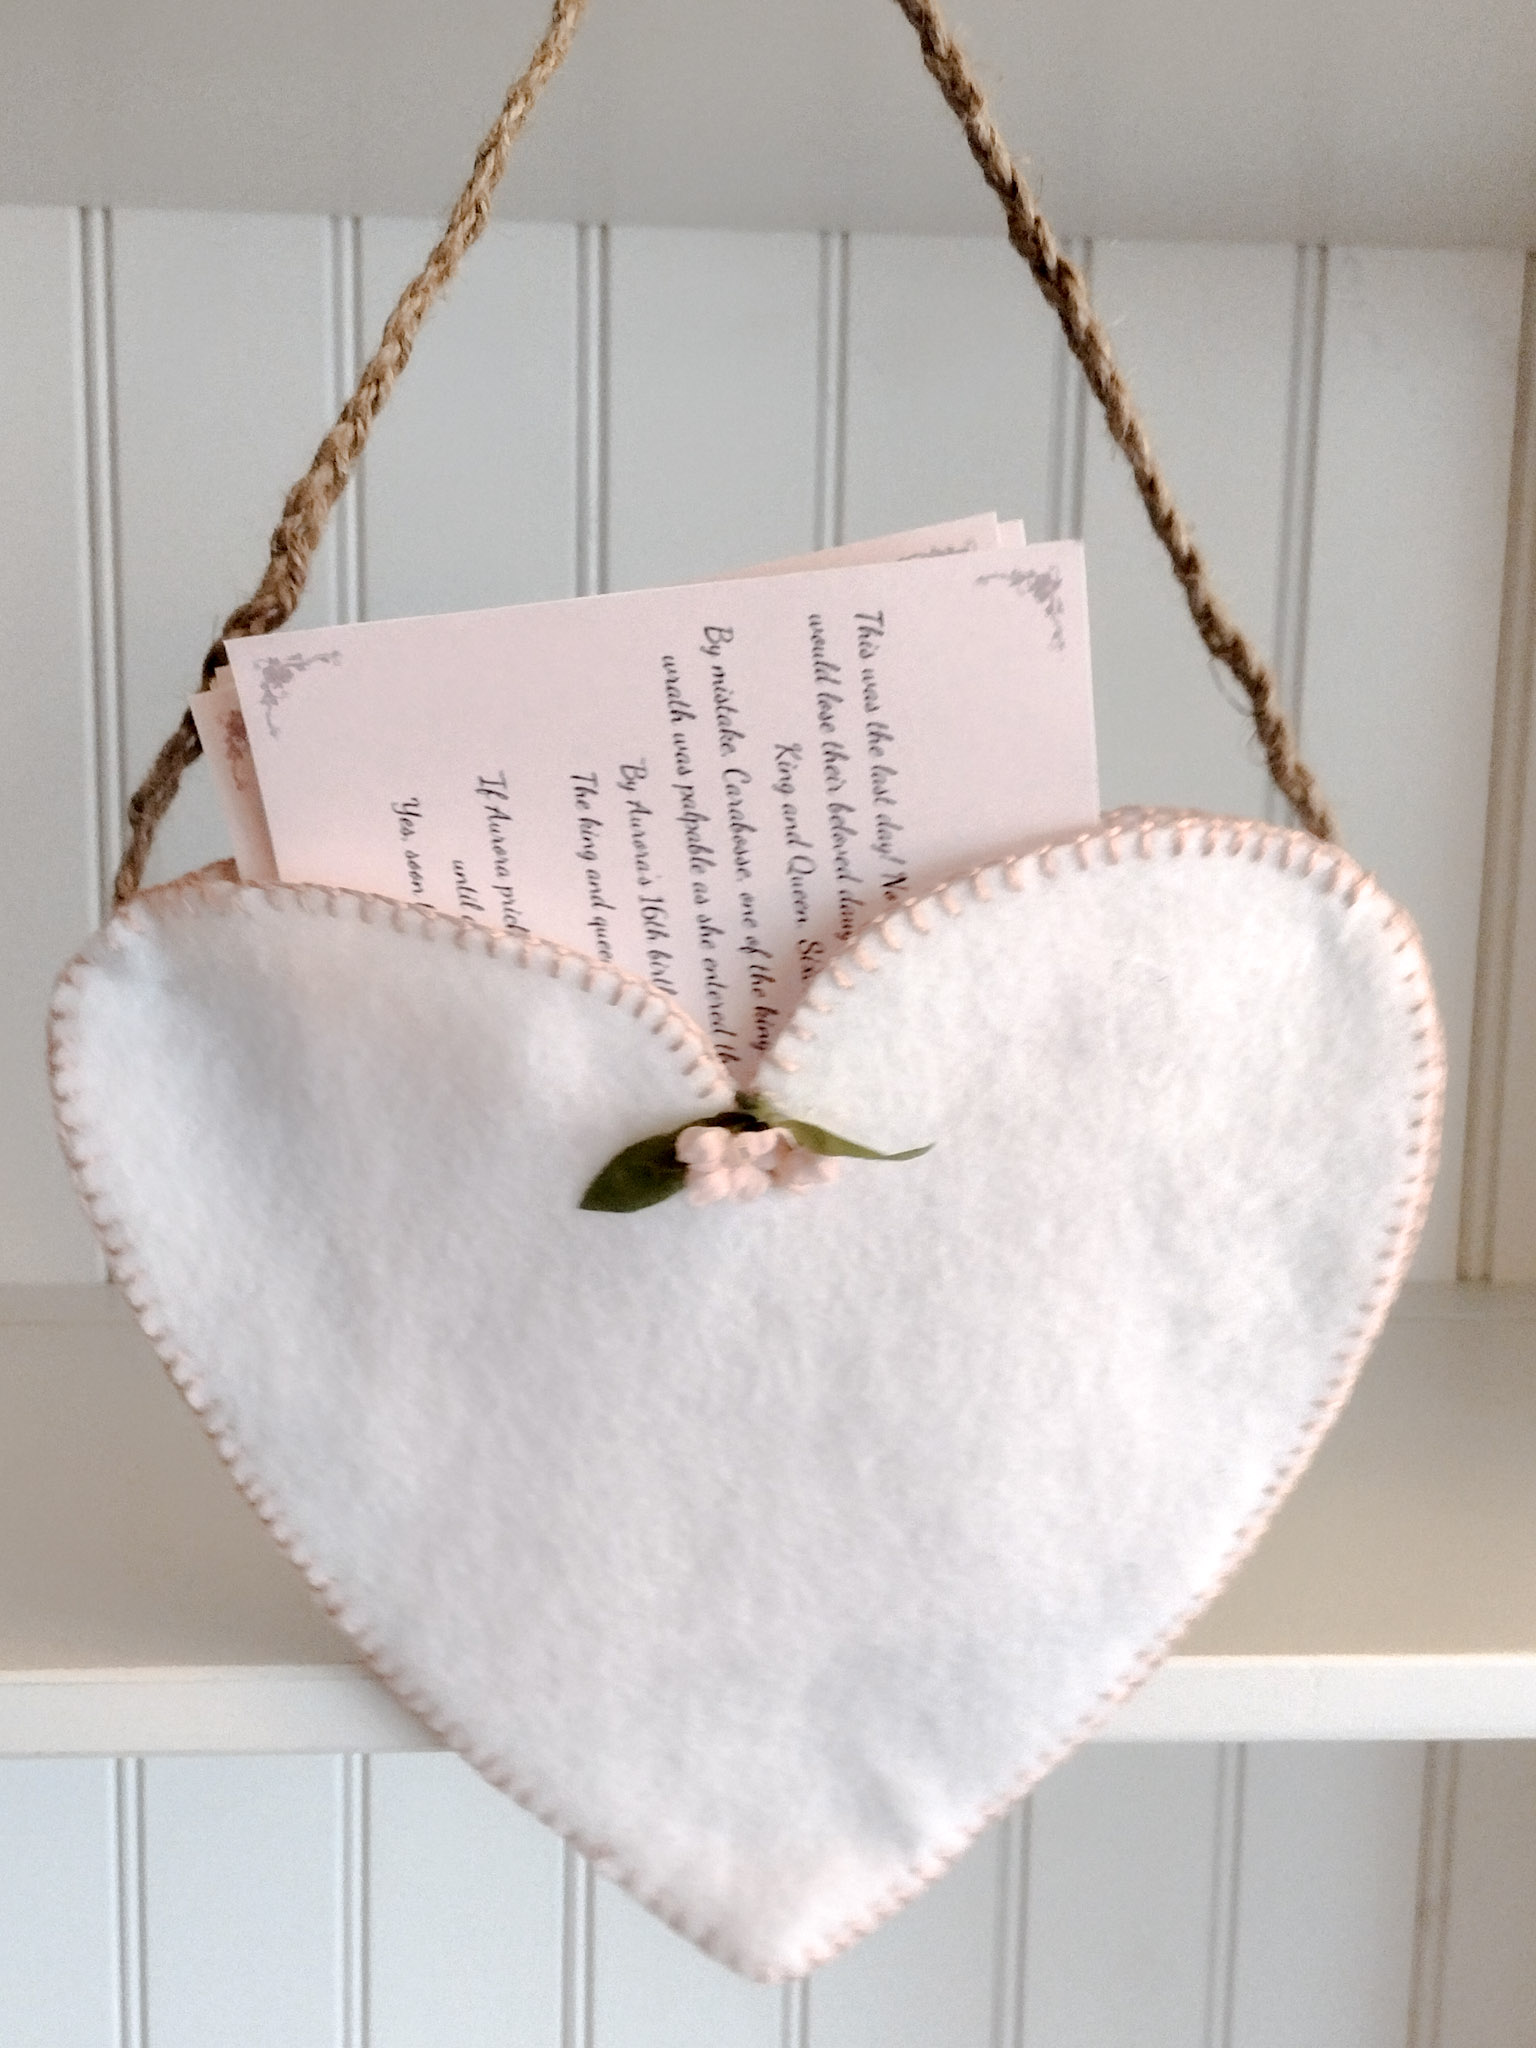 Valentines day heart pouch with count down to Valentines day story cards inside